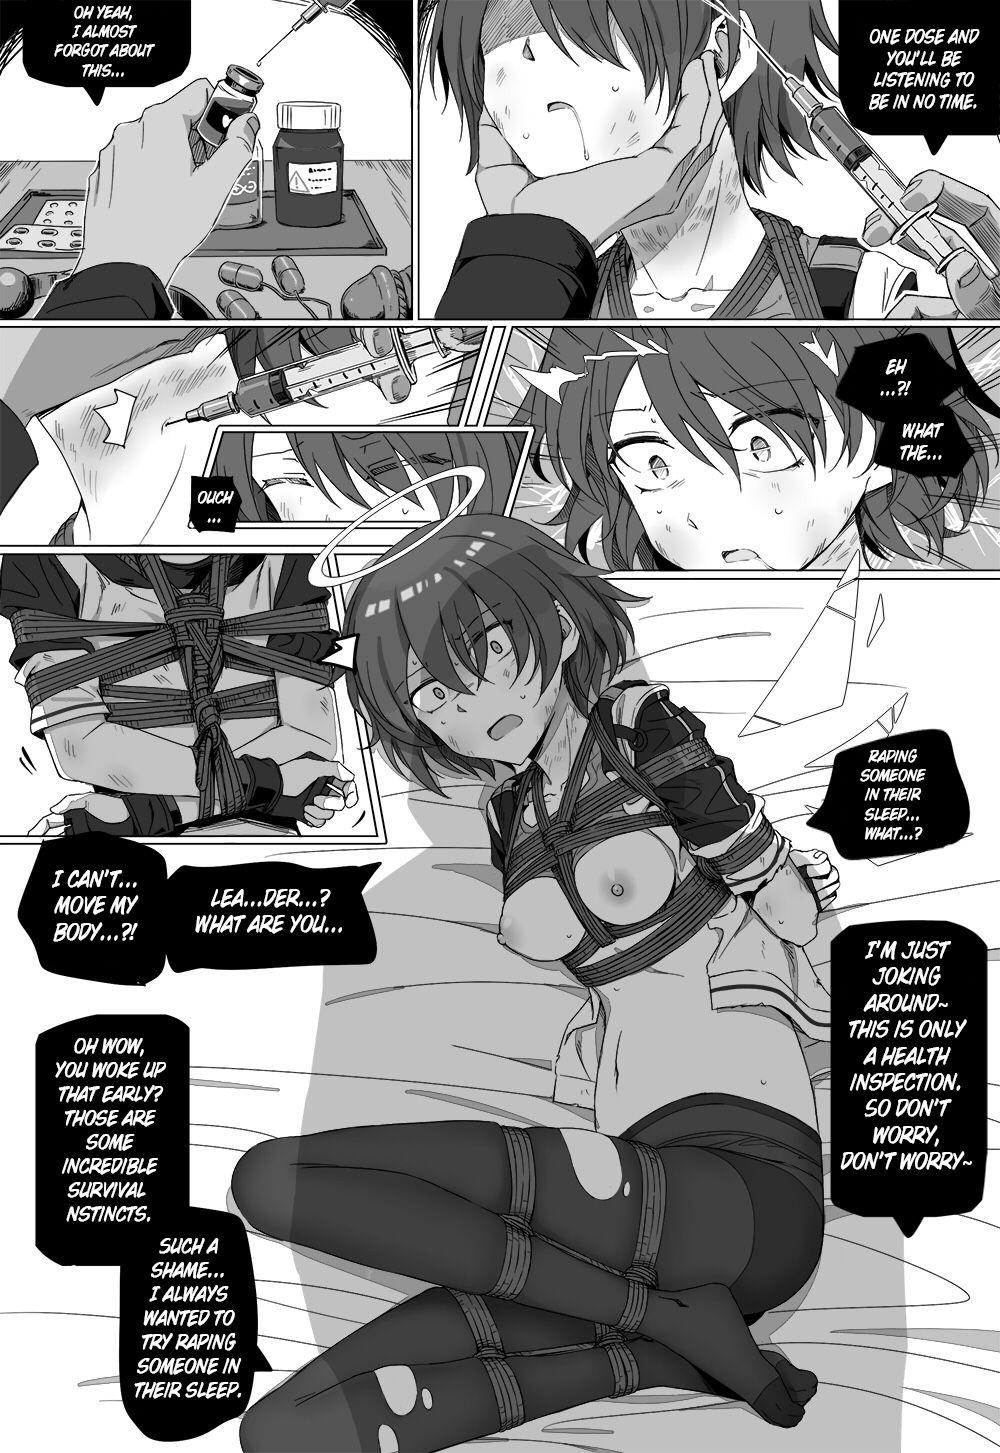 Chaturbate Impotent Fury pg 23-34 - Arknights Tranny Sex - Page 12